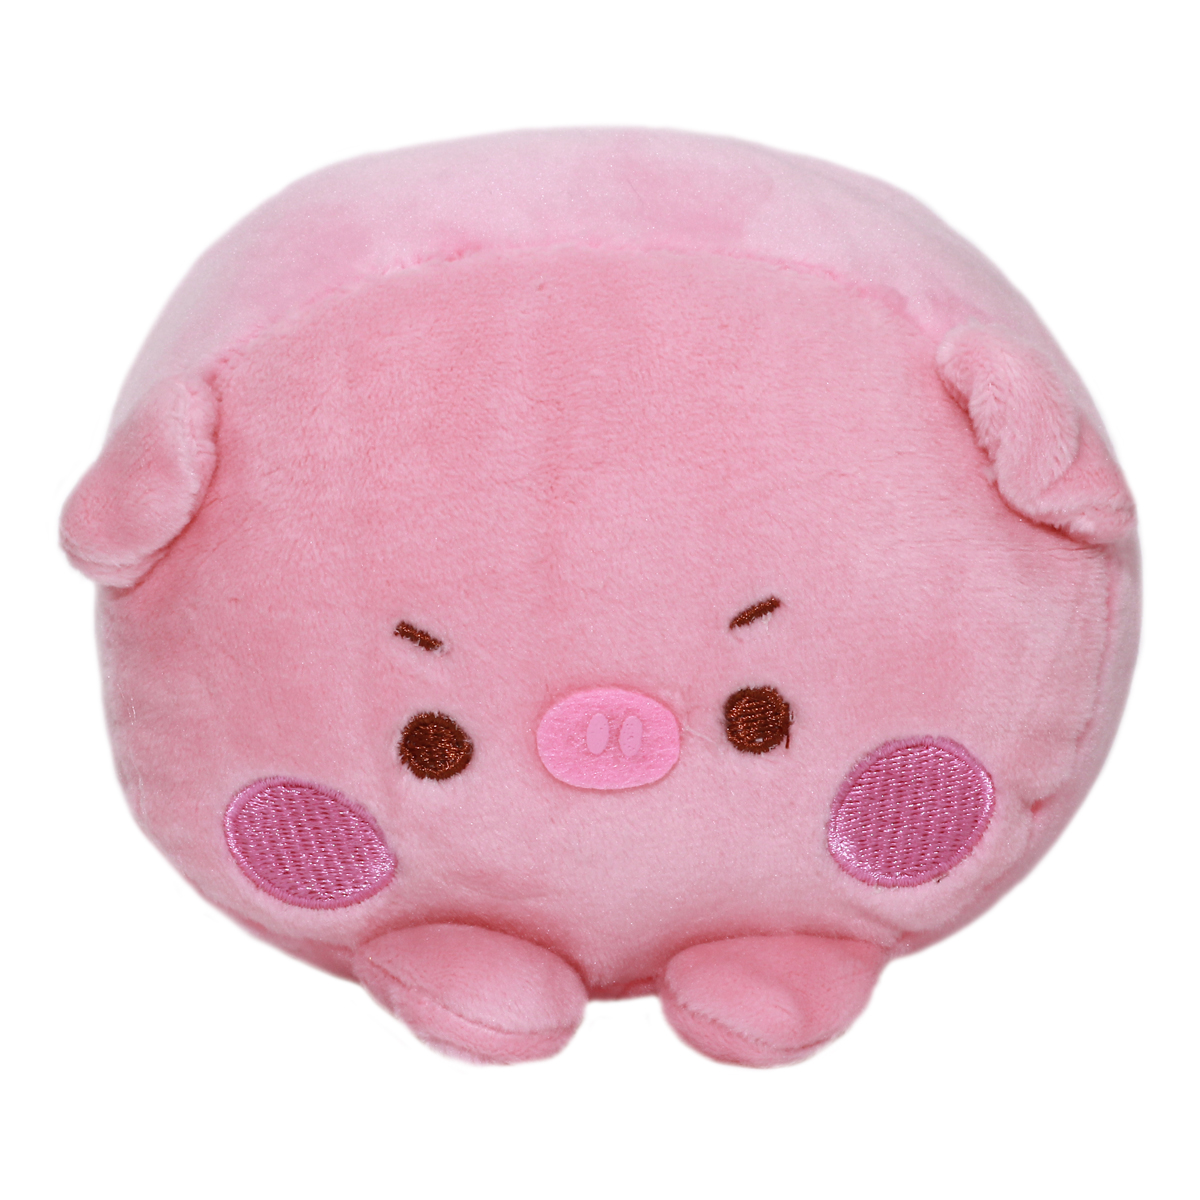 Soft & Squishy Big Bad Wolf Plush Collection Angry Pig Pink 6 Inches